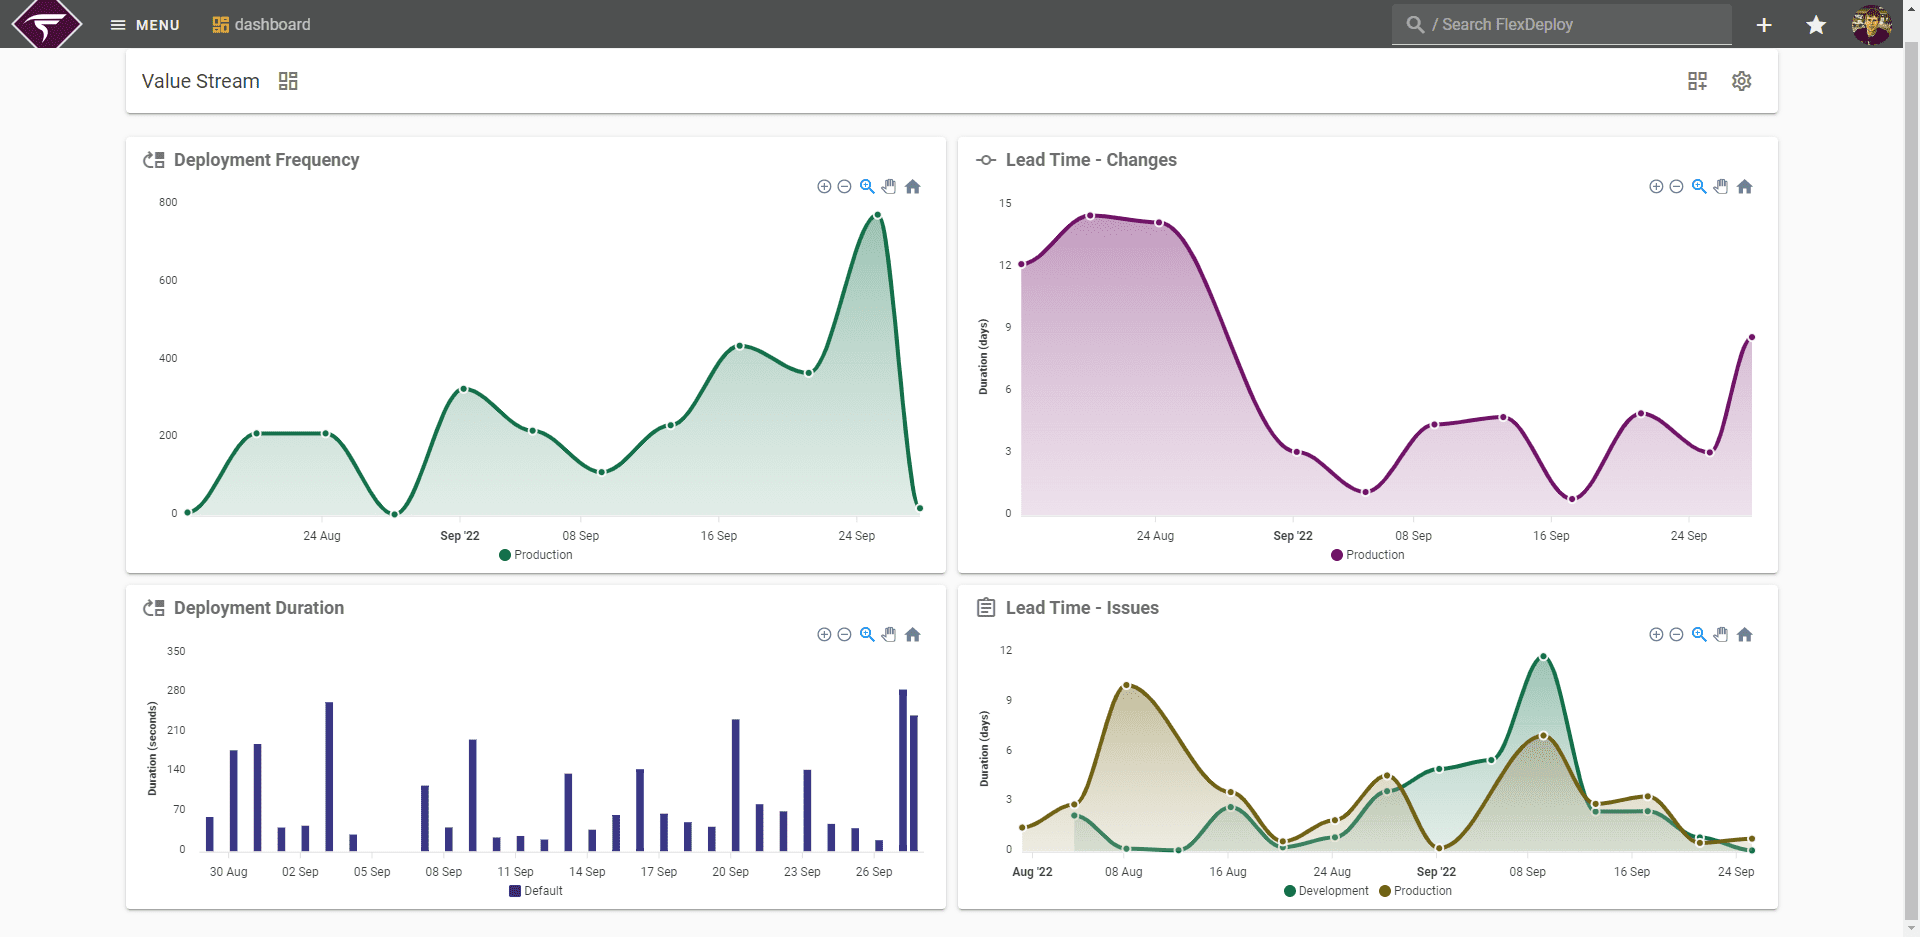 Users have the ability to customize their own personal Dashboard with DORA and other metrics